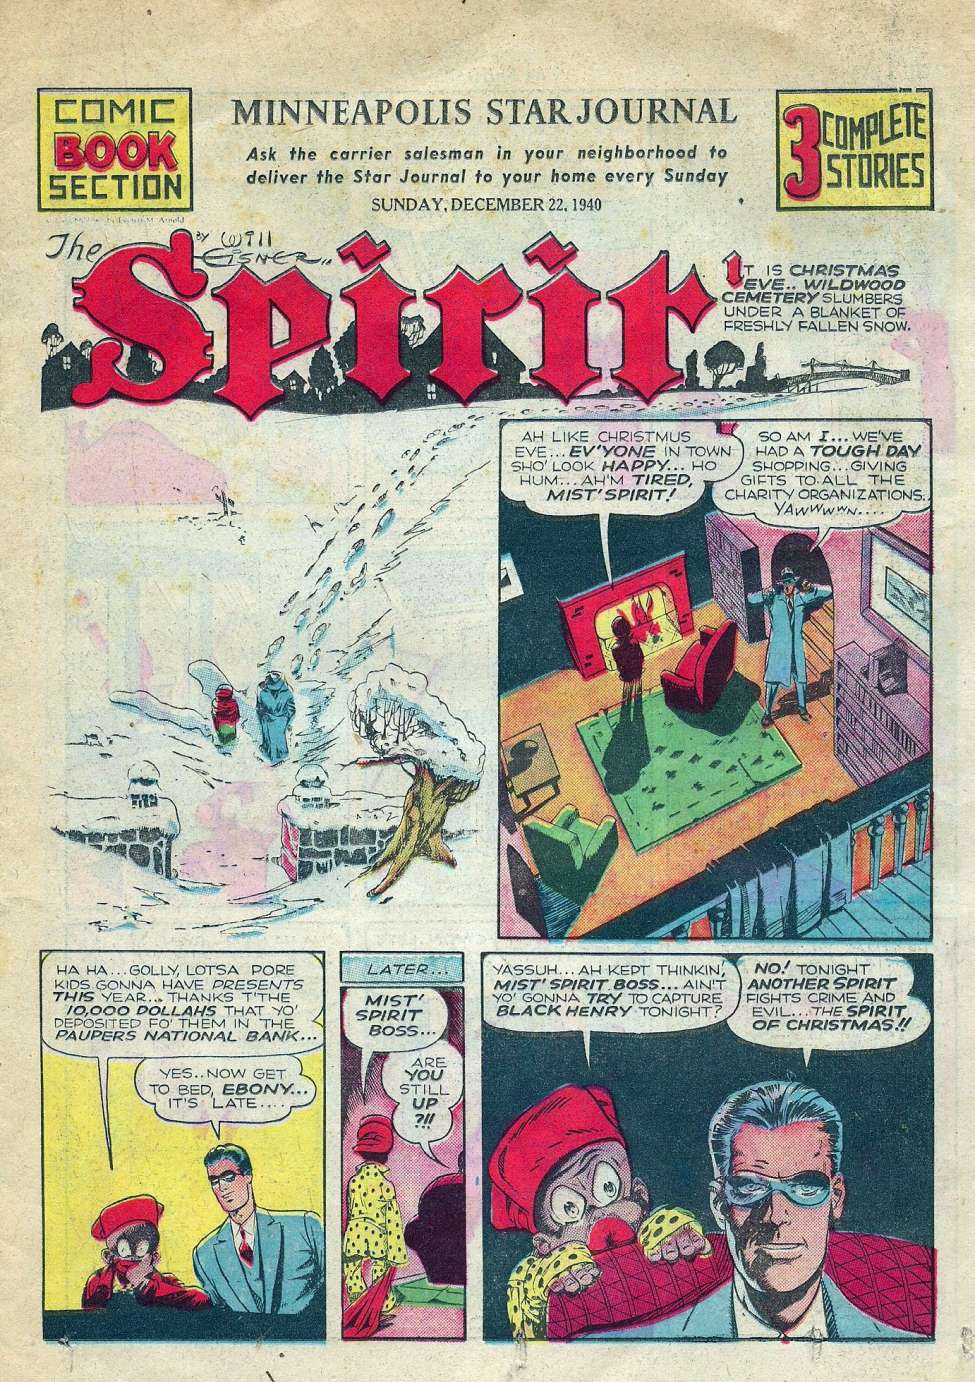 Comic Book Cover For The Spirit (1940-12-22) - Minneapolis Star Journal